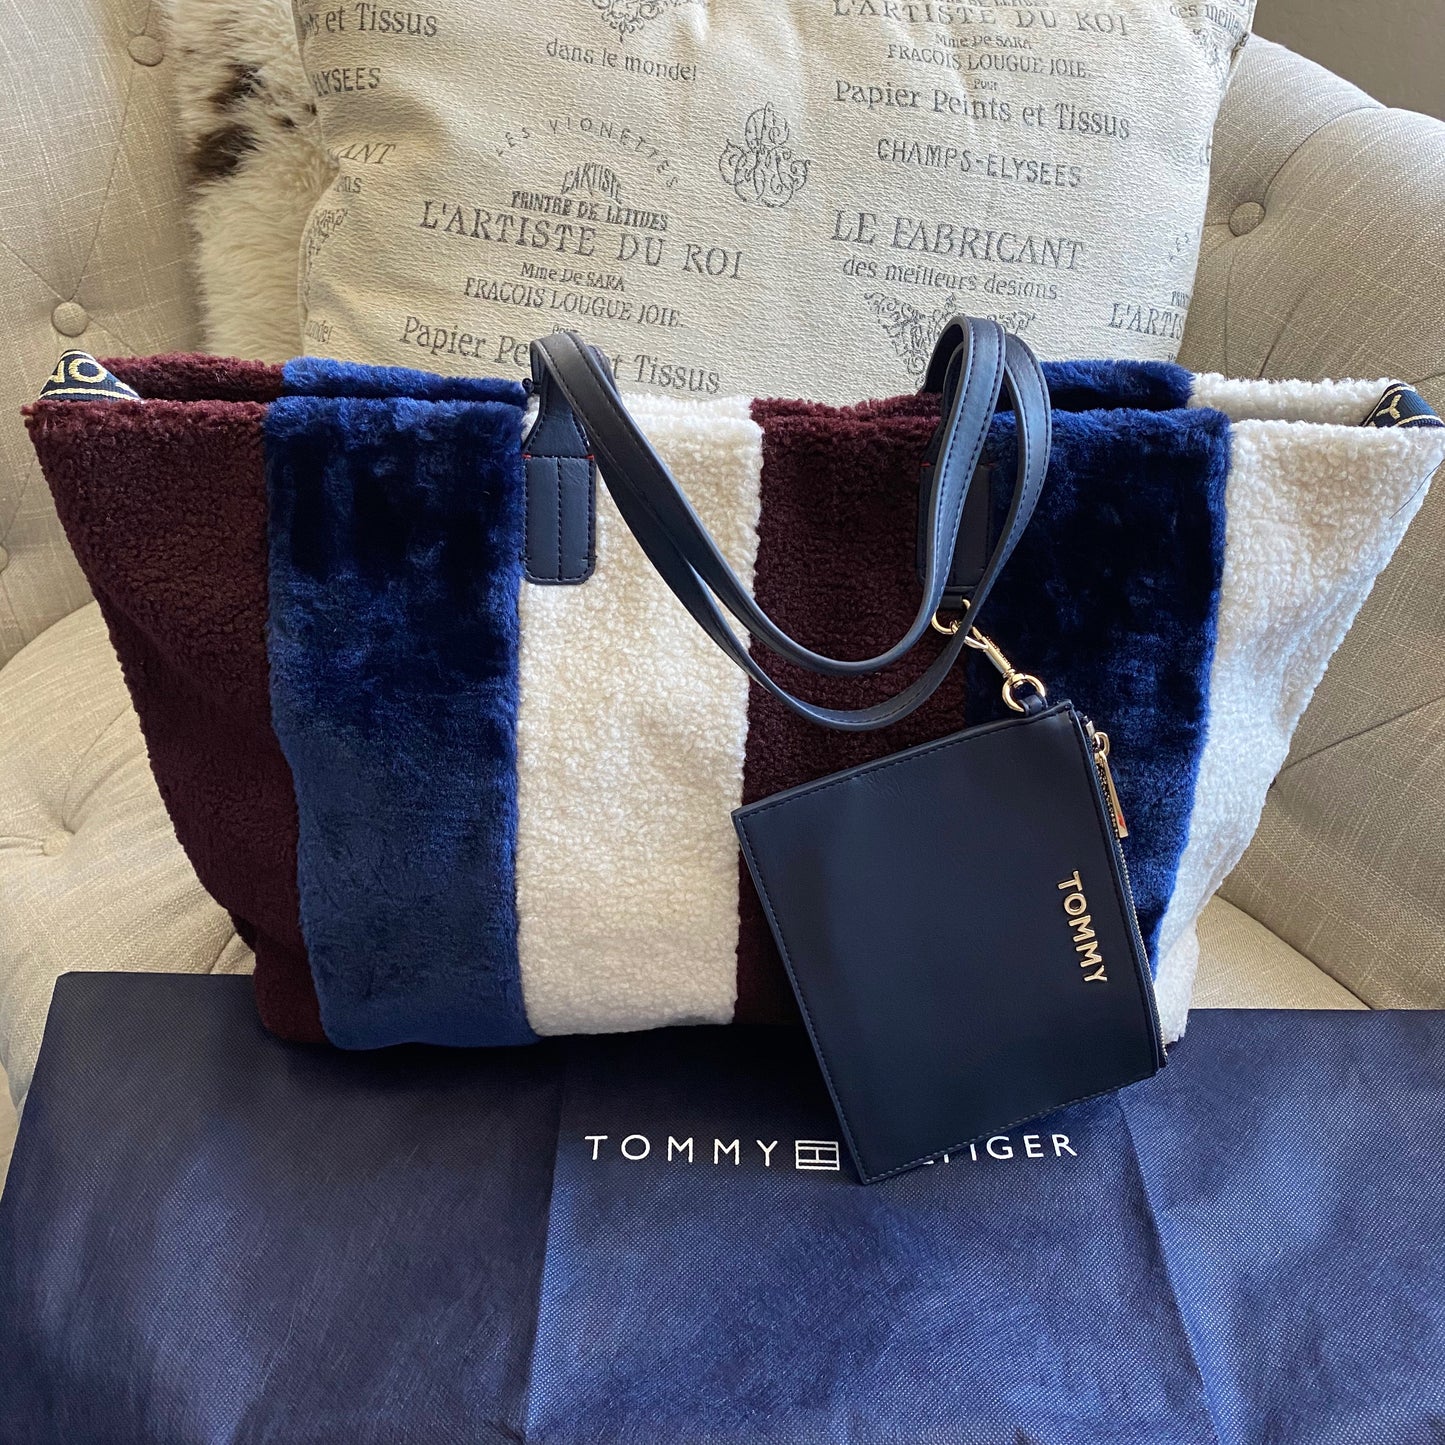 Tommy Hilfiger Large Plush Striped Tote